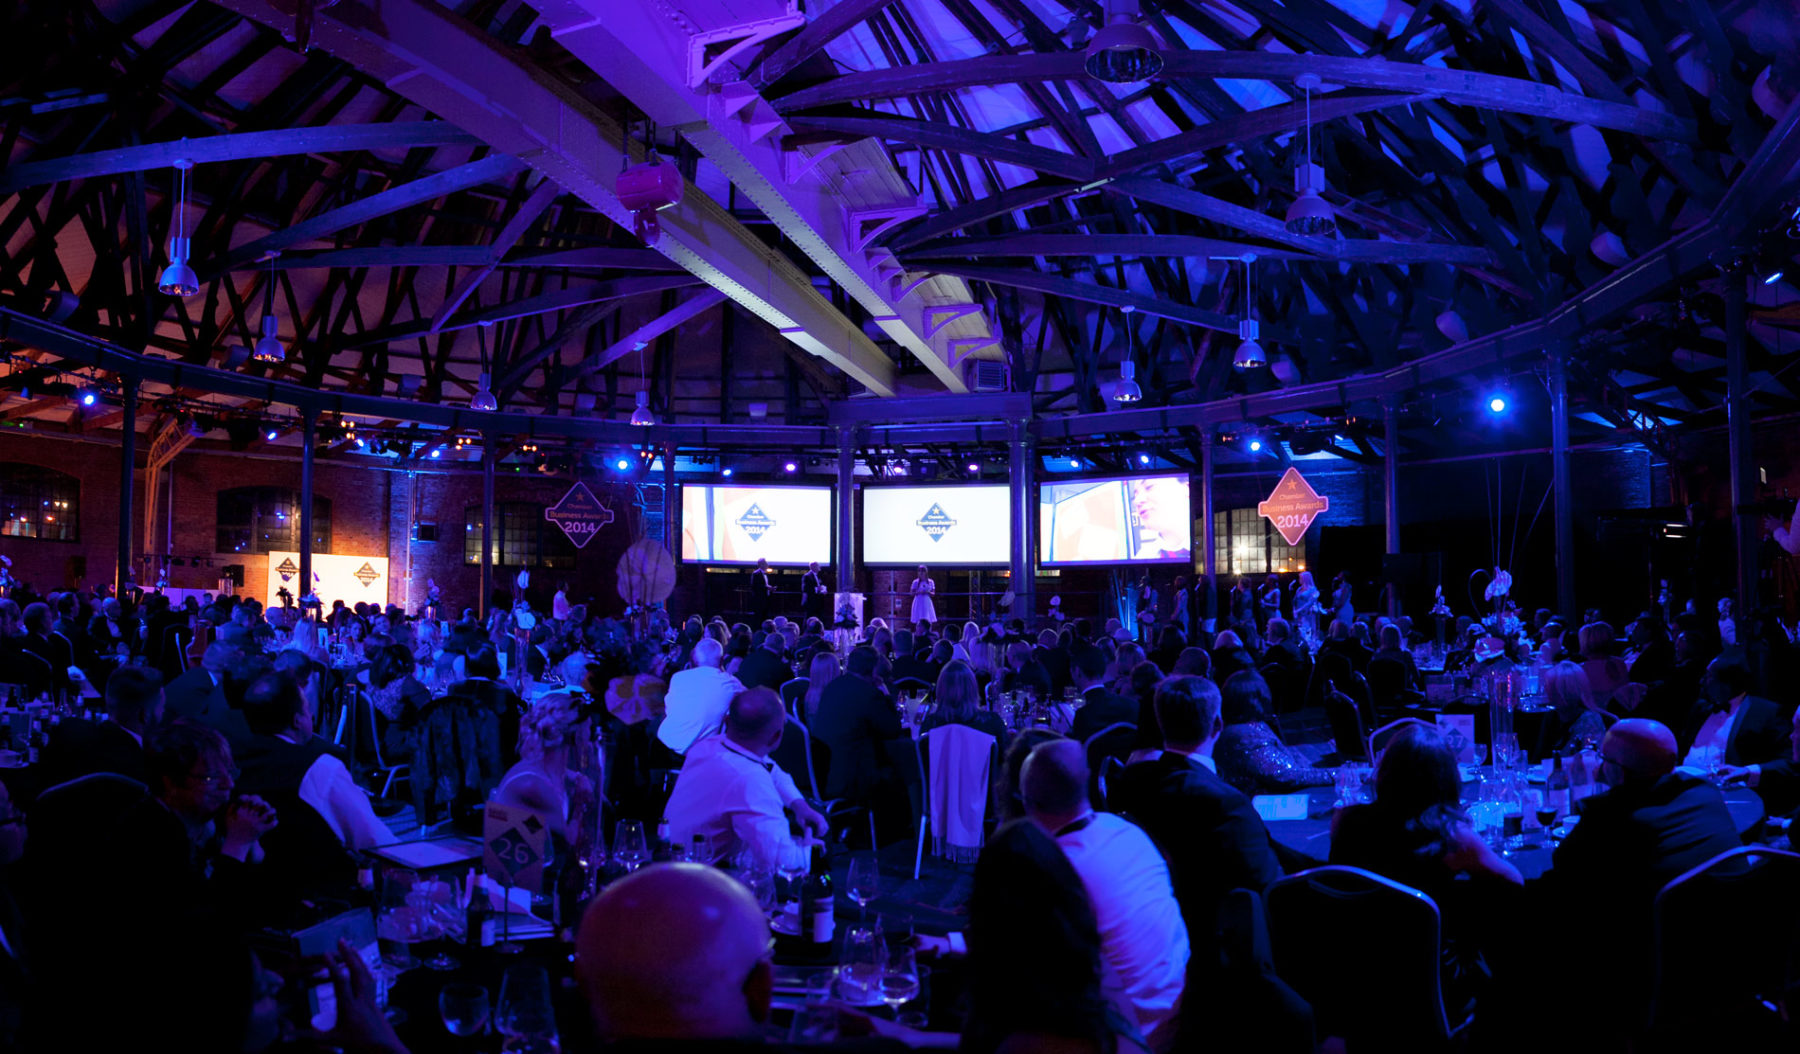 East Midlands Chamber Business Awards Event 2014, 3 large screens on stage stage Derby